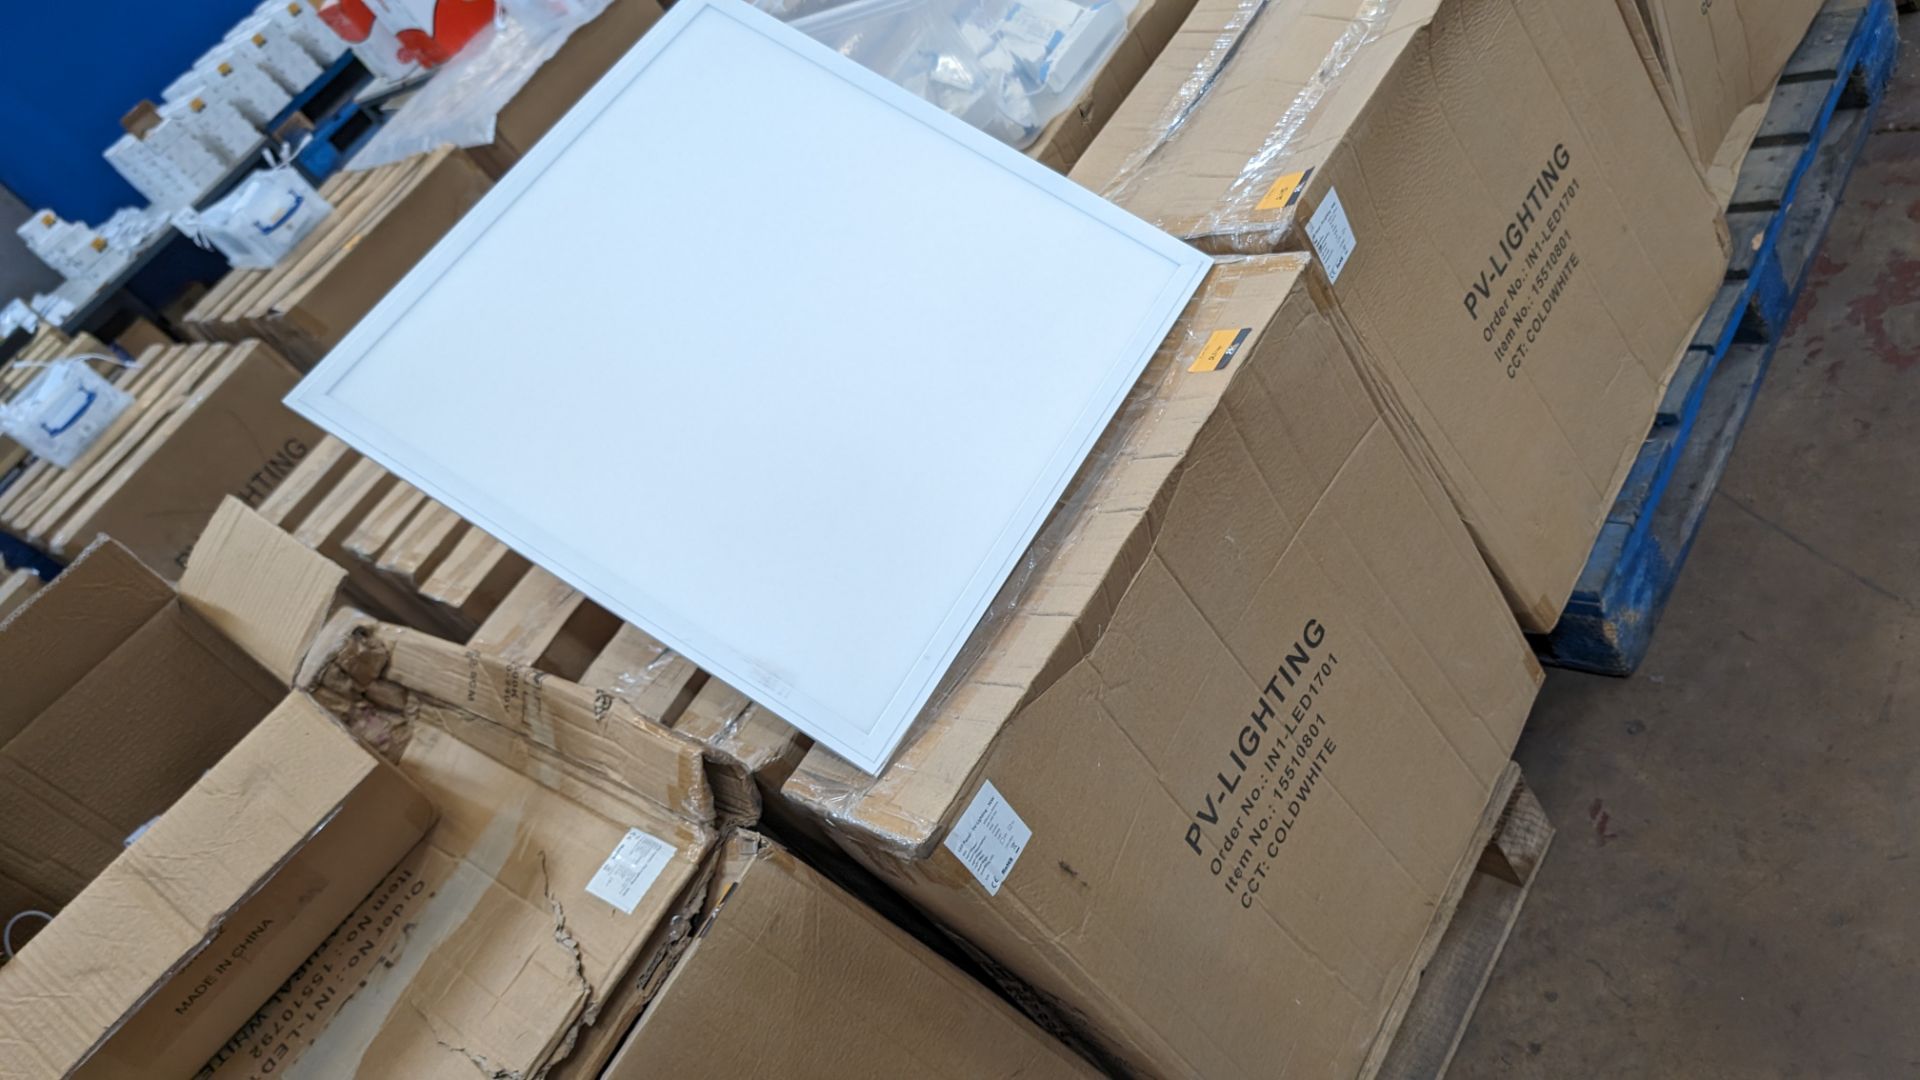 16 off 600mm x 600mm 36w 6000k 4320 lumens cold white LED lighting panels. 36w drivers. This lot c